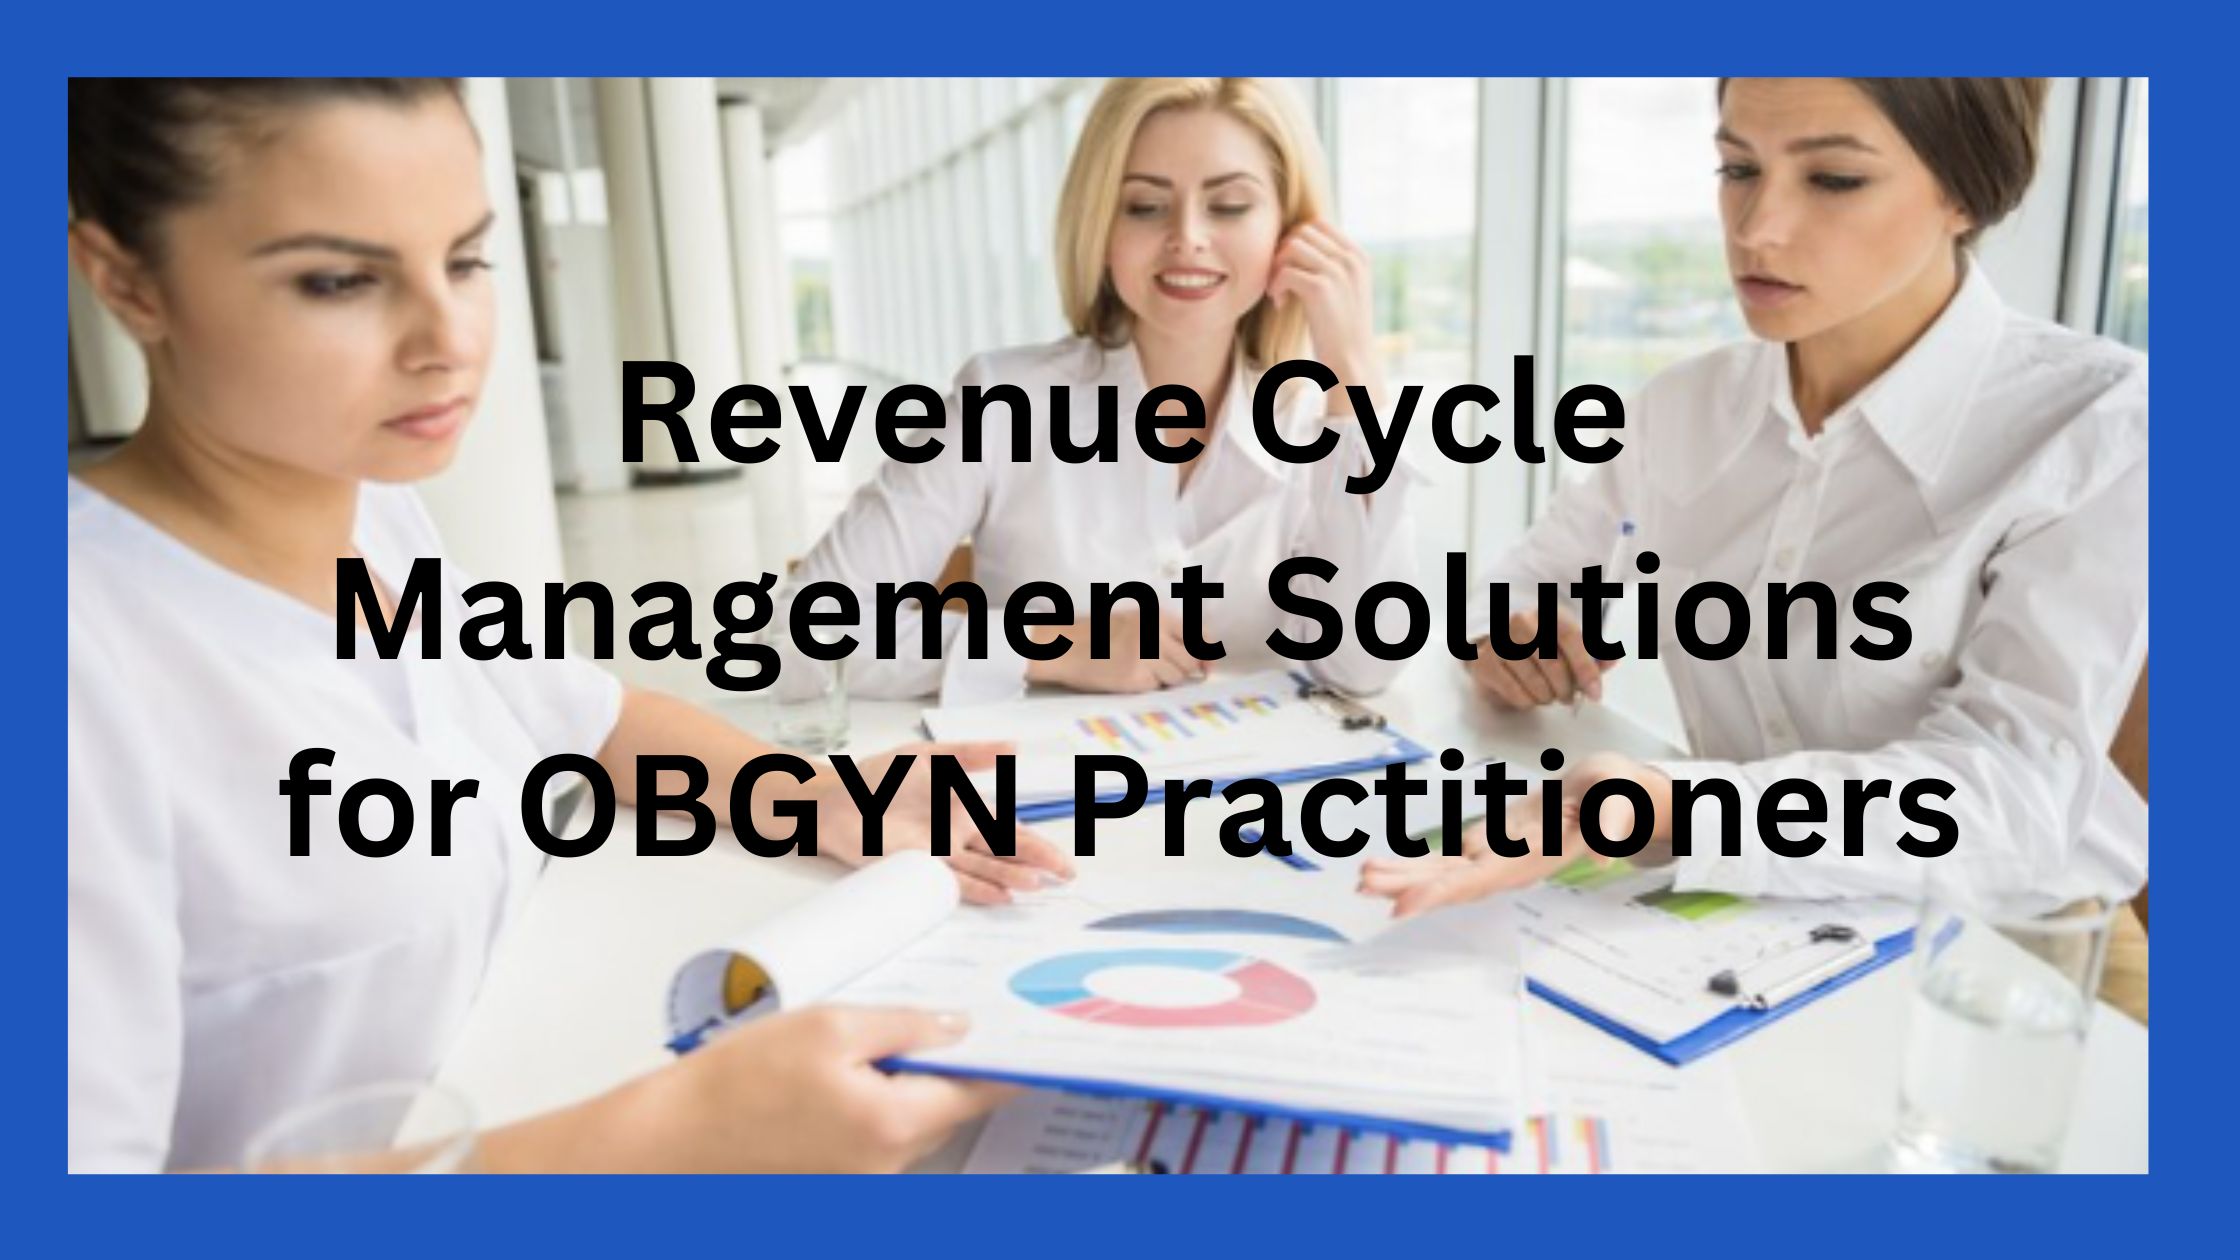 Revenue Cycle Management Solutions for OBGYN